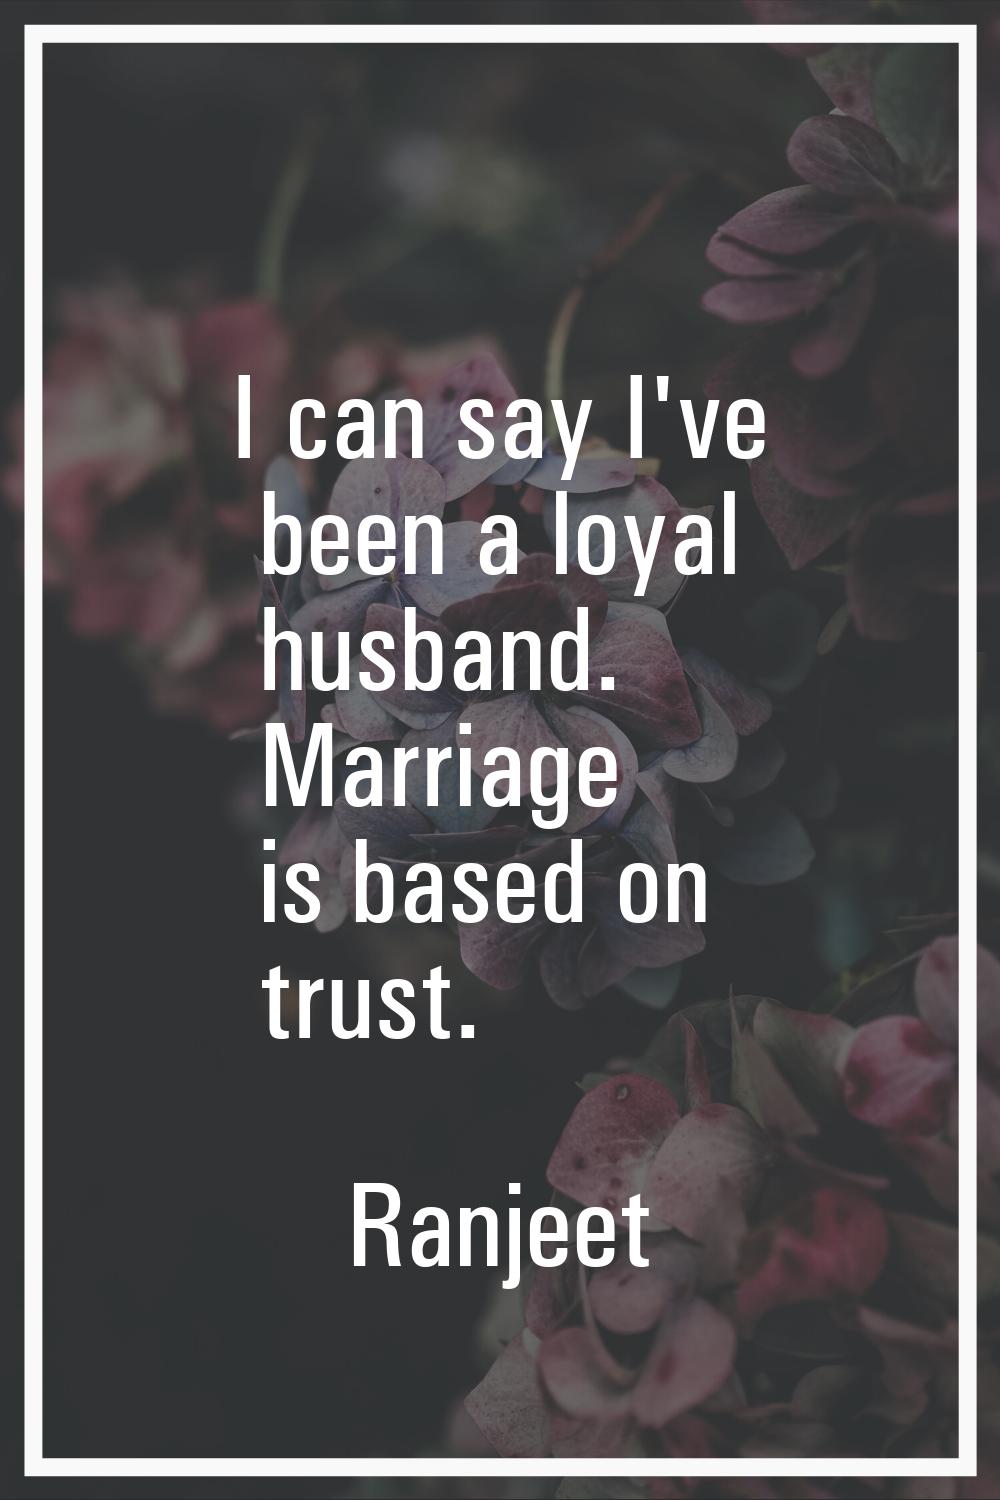 I can say I've been a loyal husband. Marriage is based on trust.